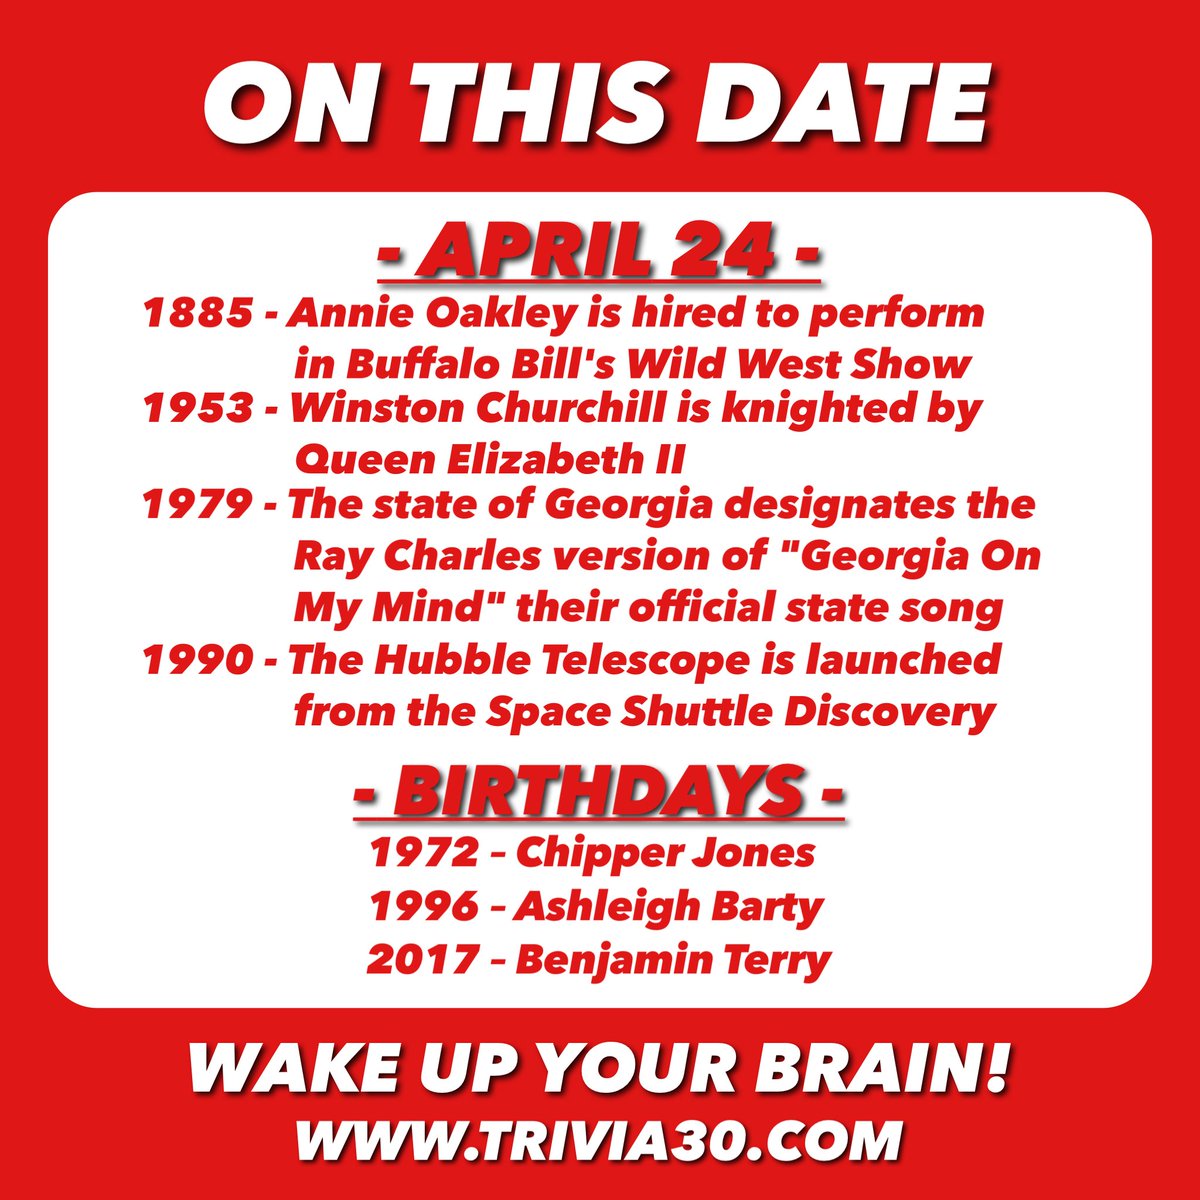 Your 4/24 OTD... Join us at Tidewater Grill or Disco Witch, and have a great Wednesday! #trivia30 #wakeupyourbrain #OnThisDay #AnnieOakley #BuffaloBill #WinstonChurchill #QueenElizabeth #Georgia #RayCharles #Hubble #NASA #ChipperJones #Braves #AshleighBarty #tennis #BenjaminTerry